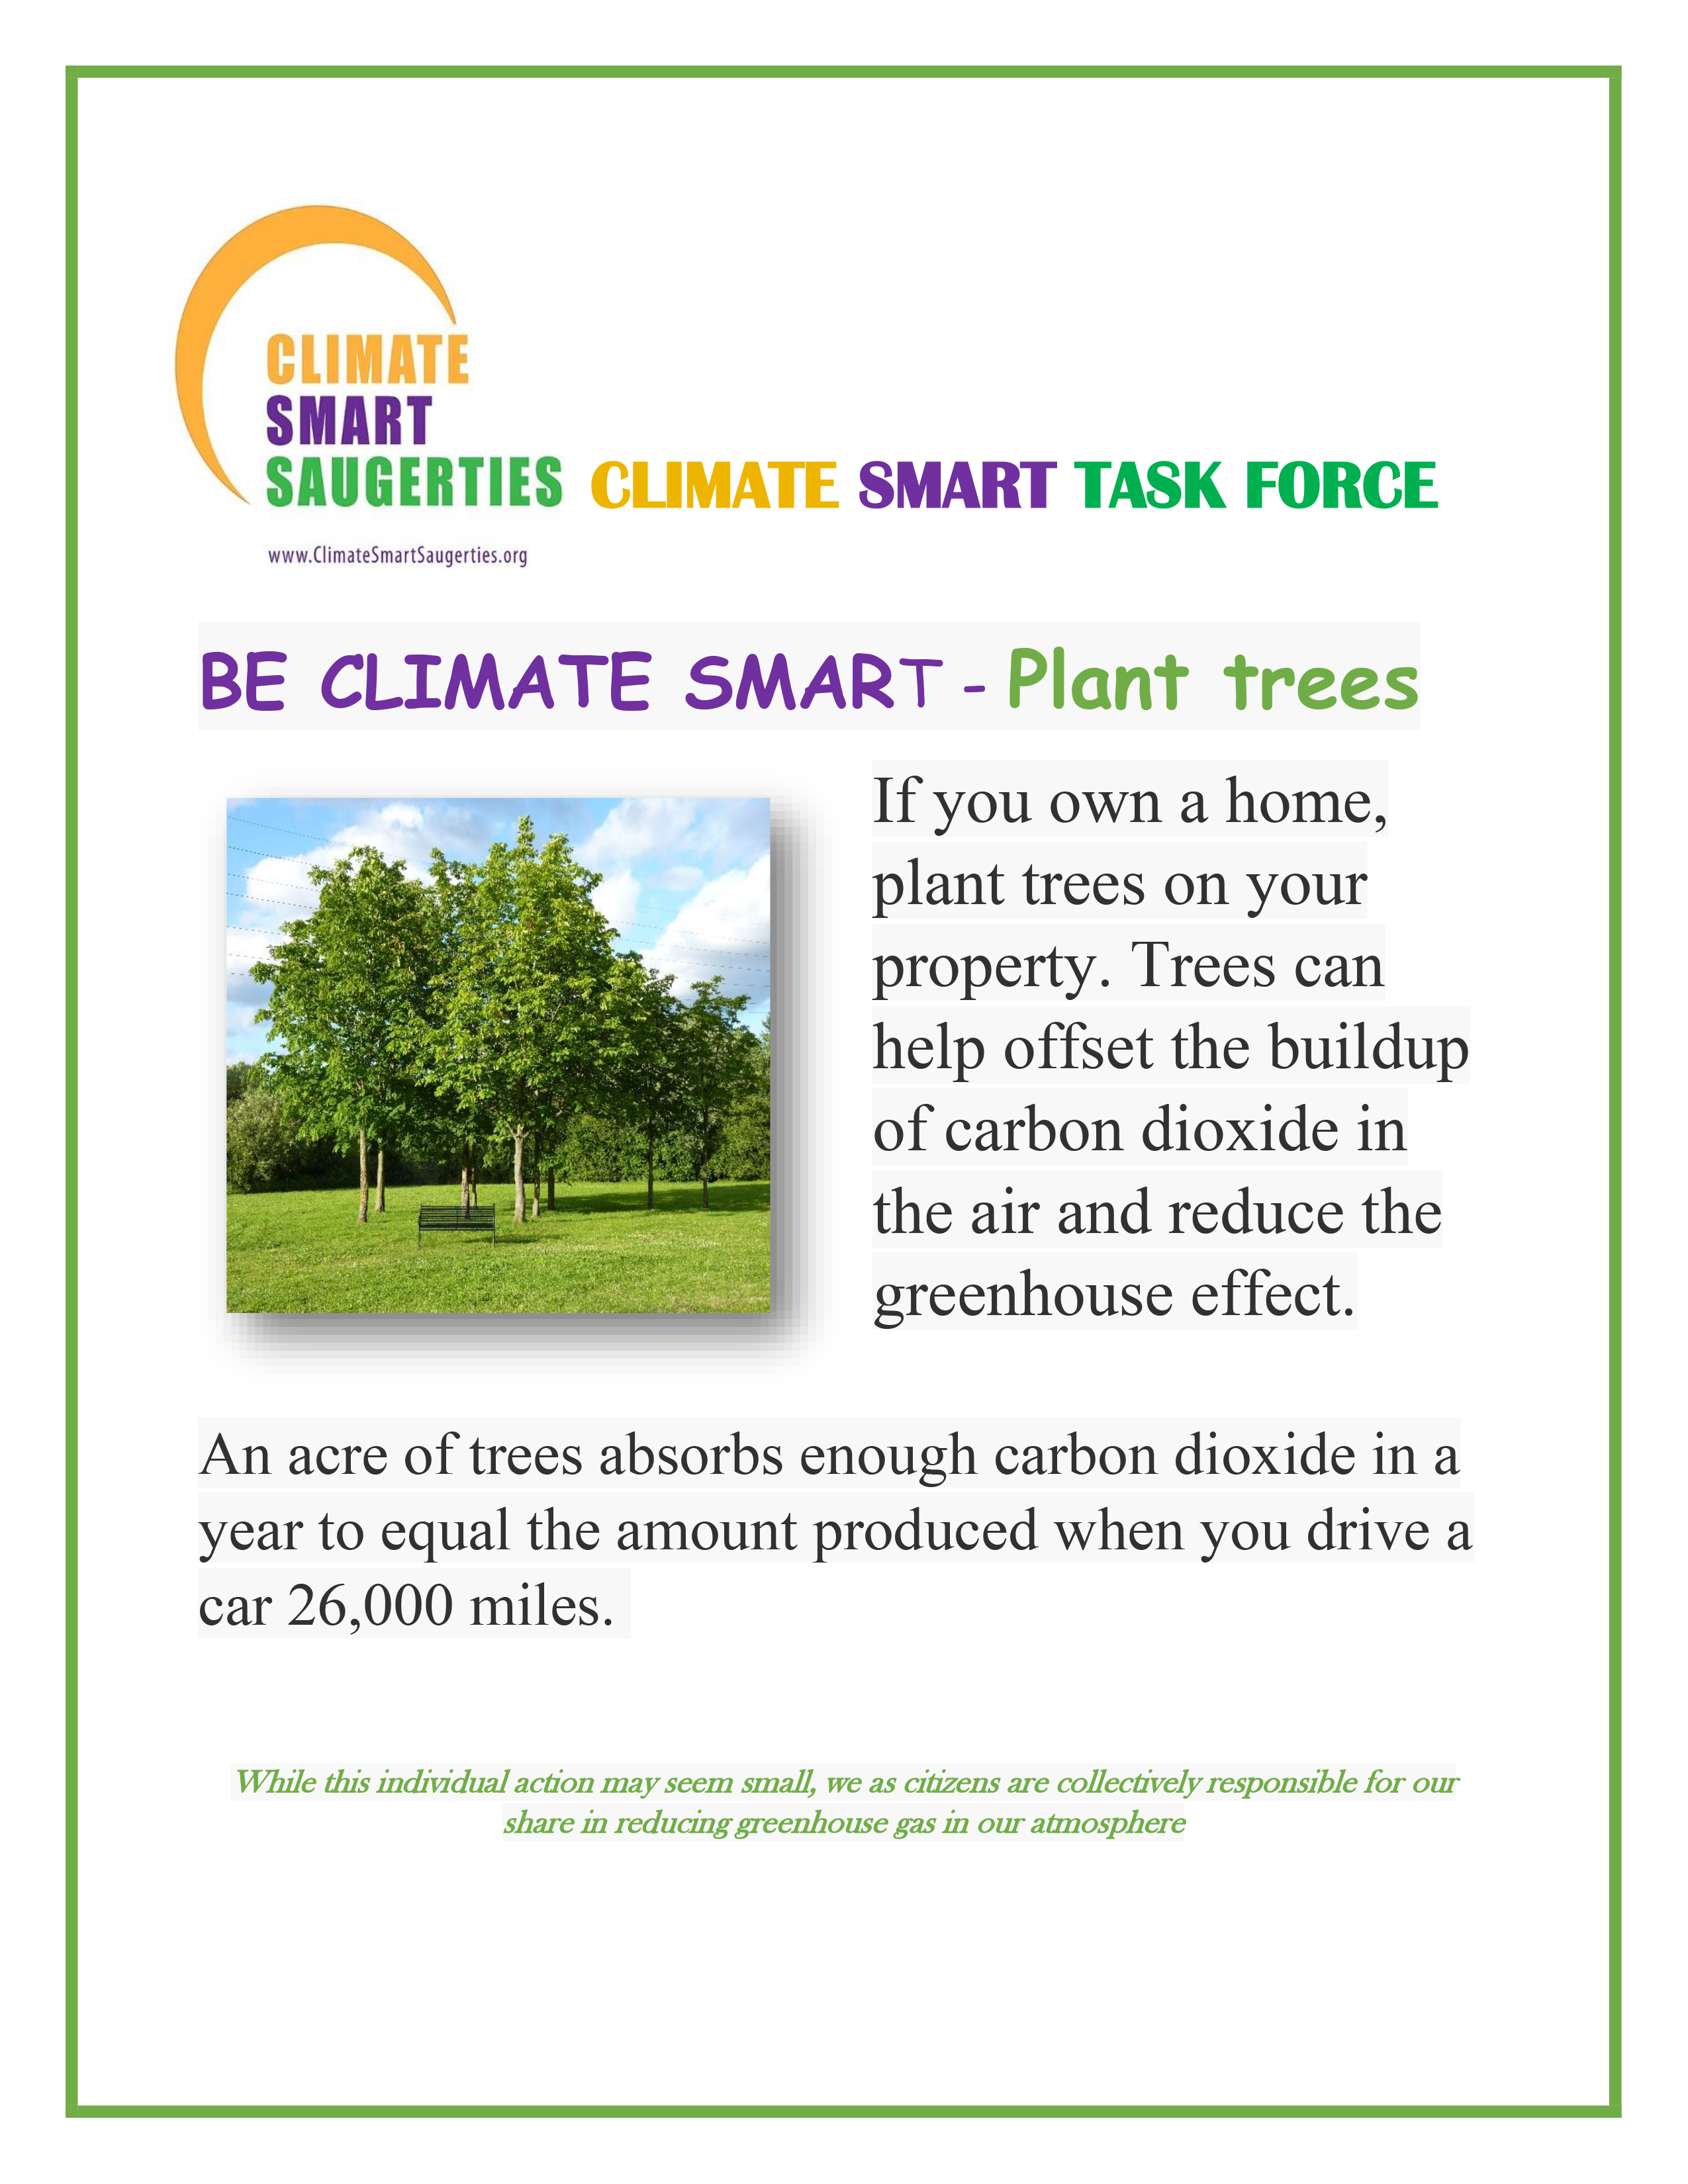 Poster with advice about planting a tree on your property